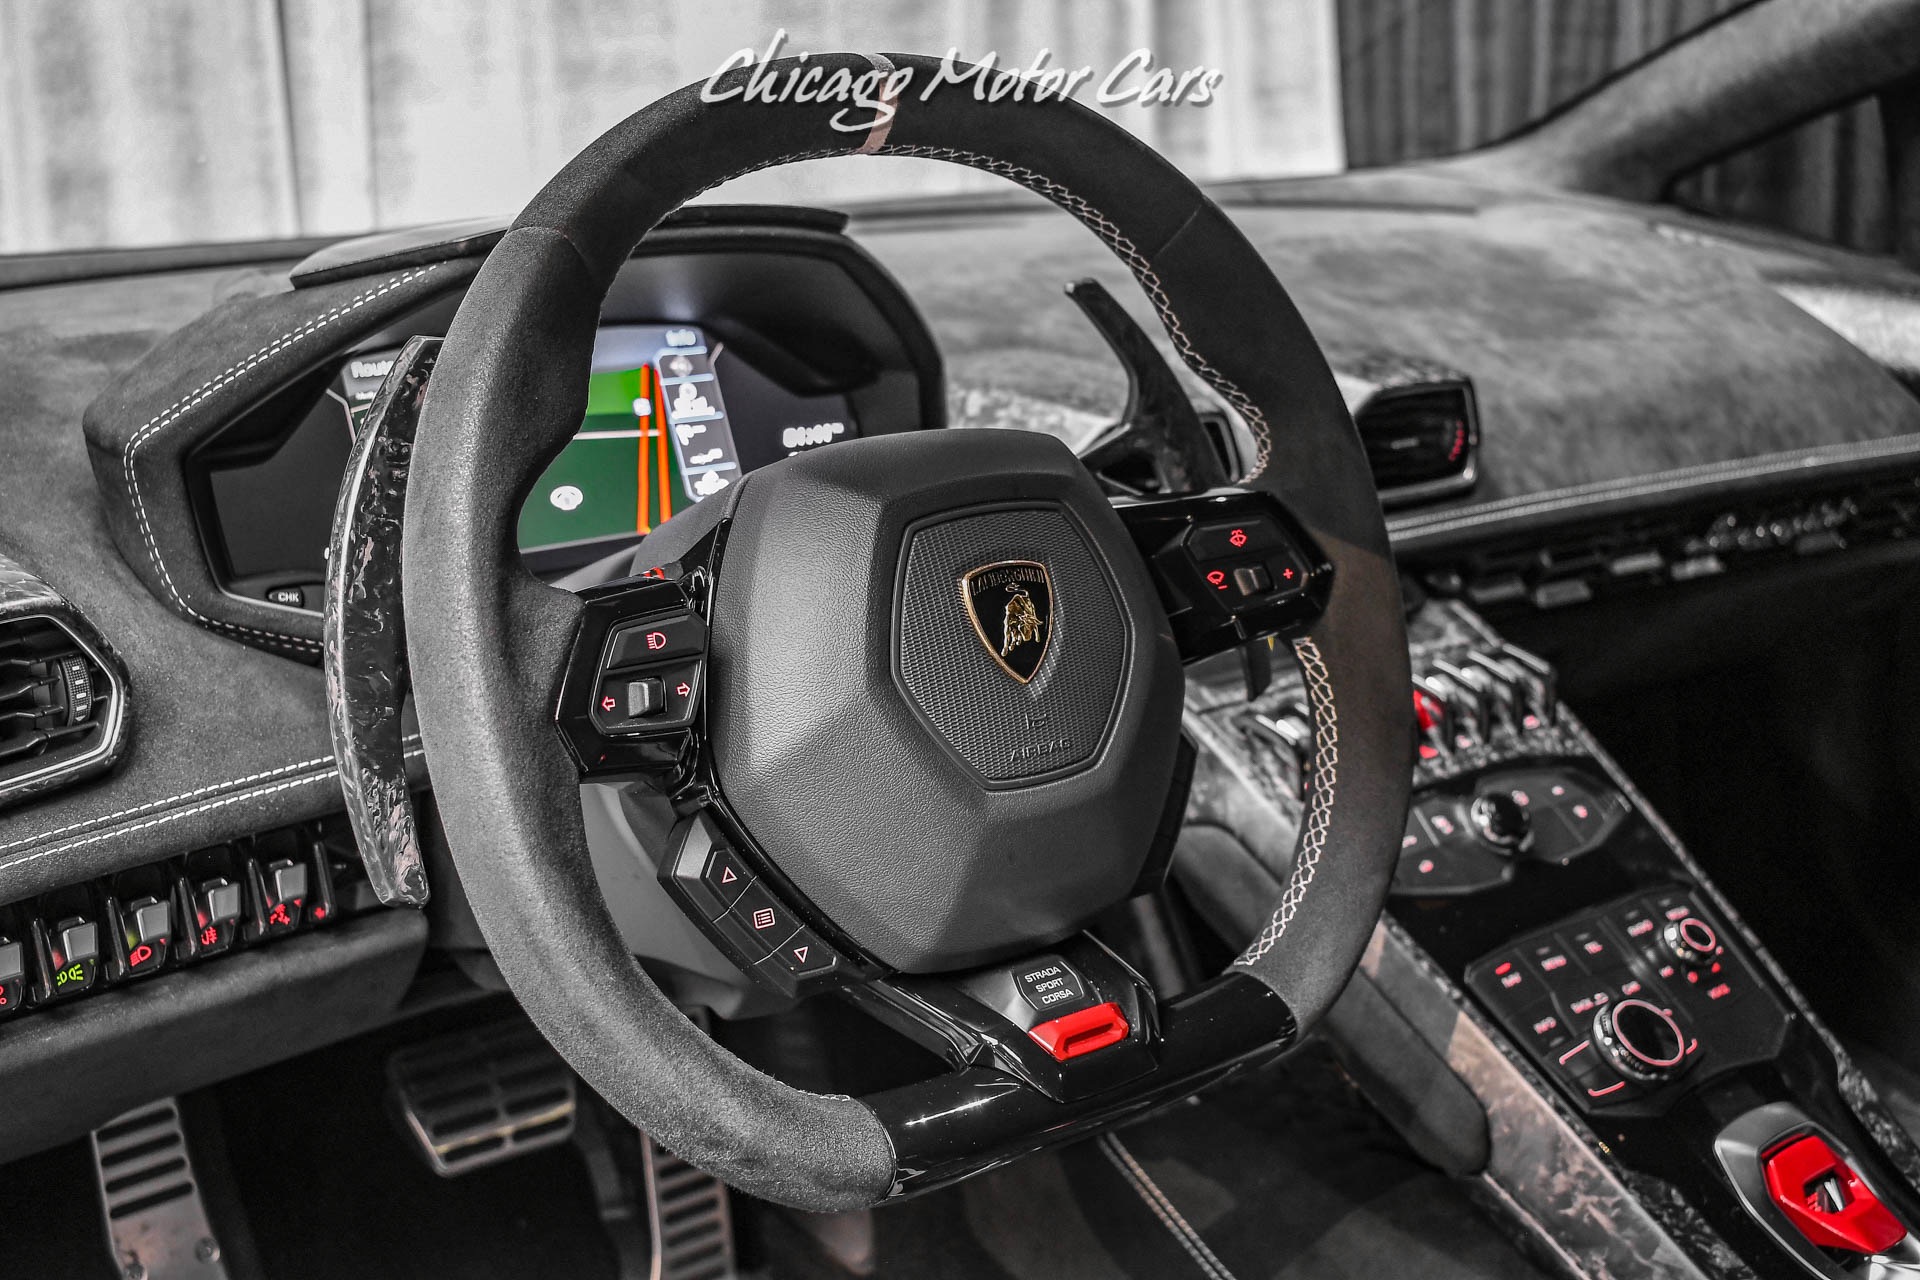 Used-2018-Lamborghini-Huracan-LP640-4-Performante-Carbon-Bucket-Seats-Lift-System-Laser-Engraved-Package